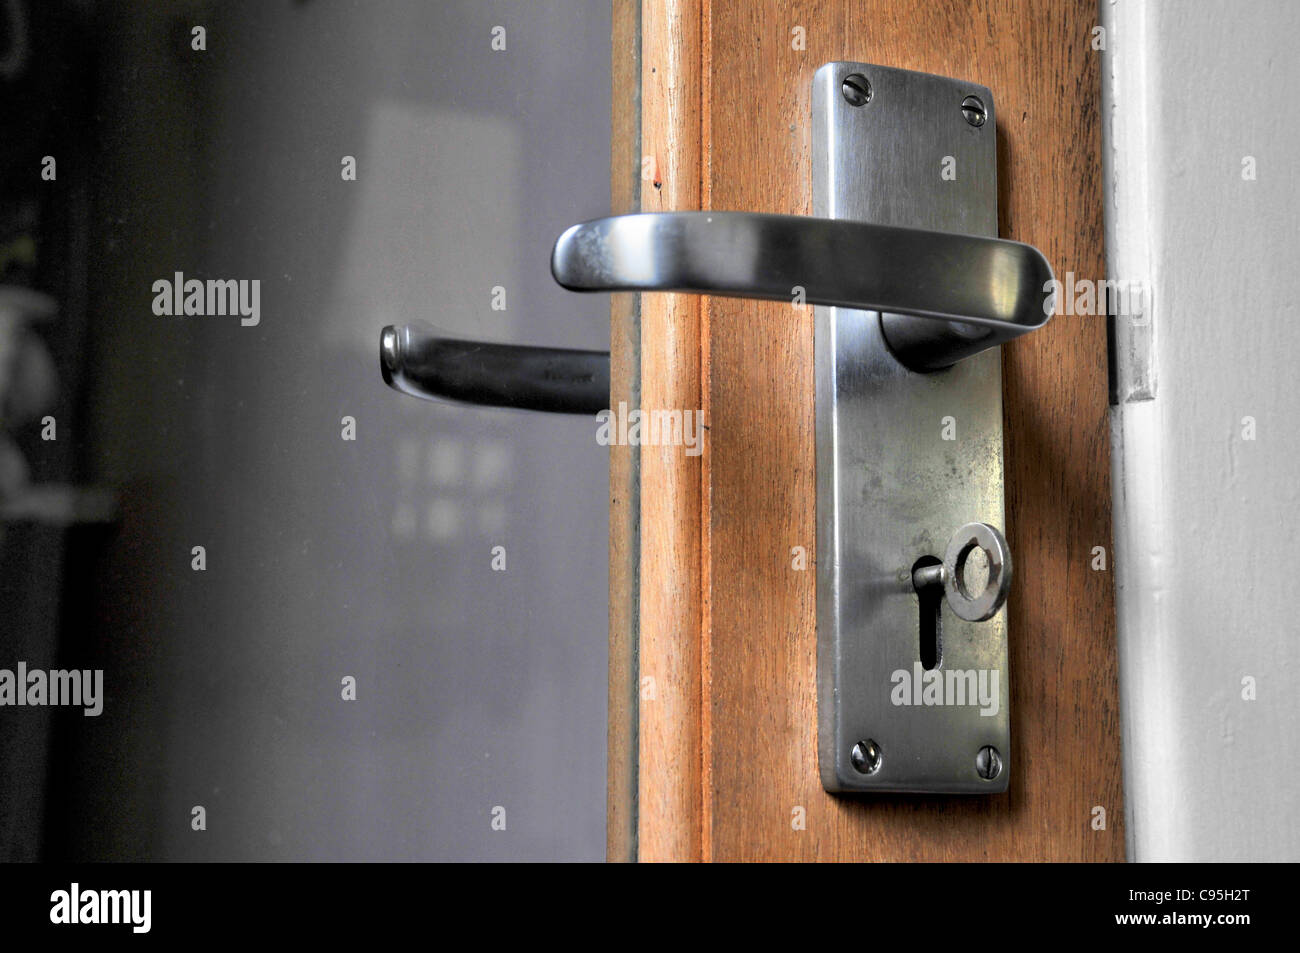 A locked glass door and door handle with a key in the keyhole. Stock Photo